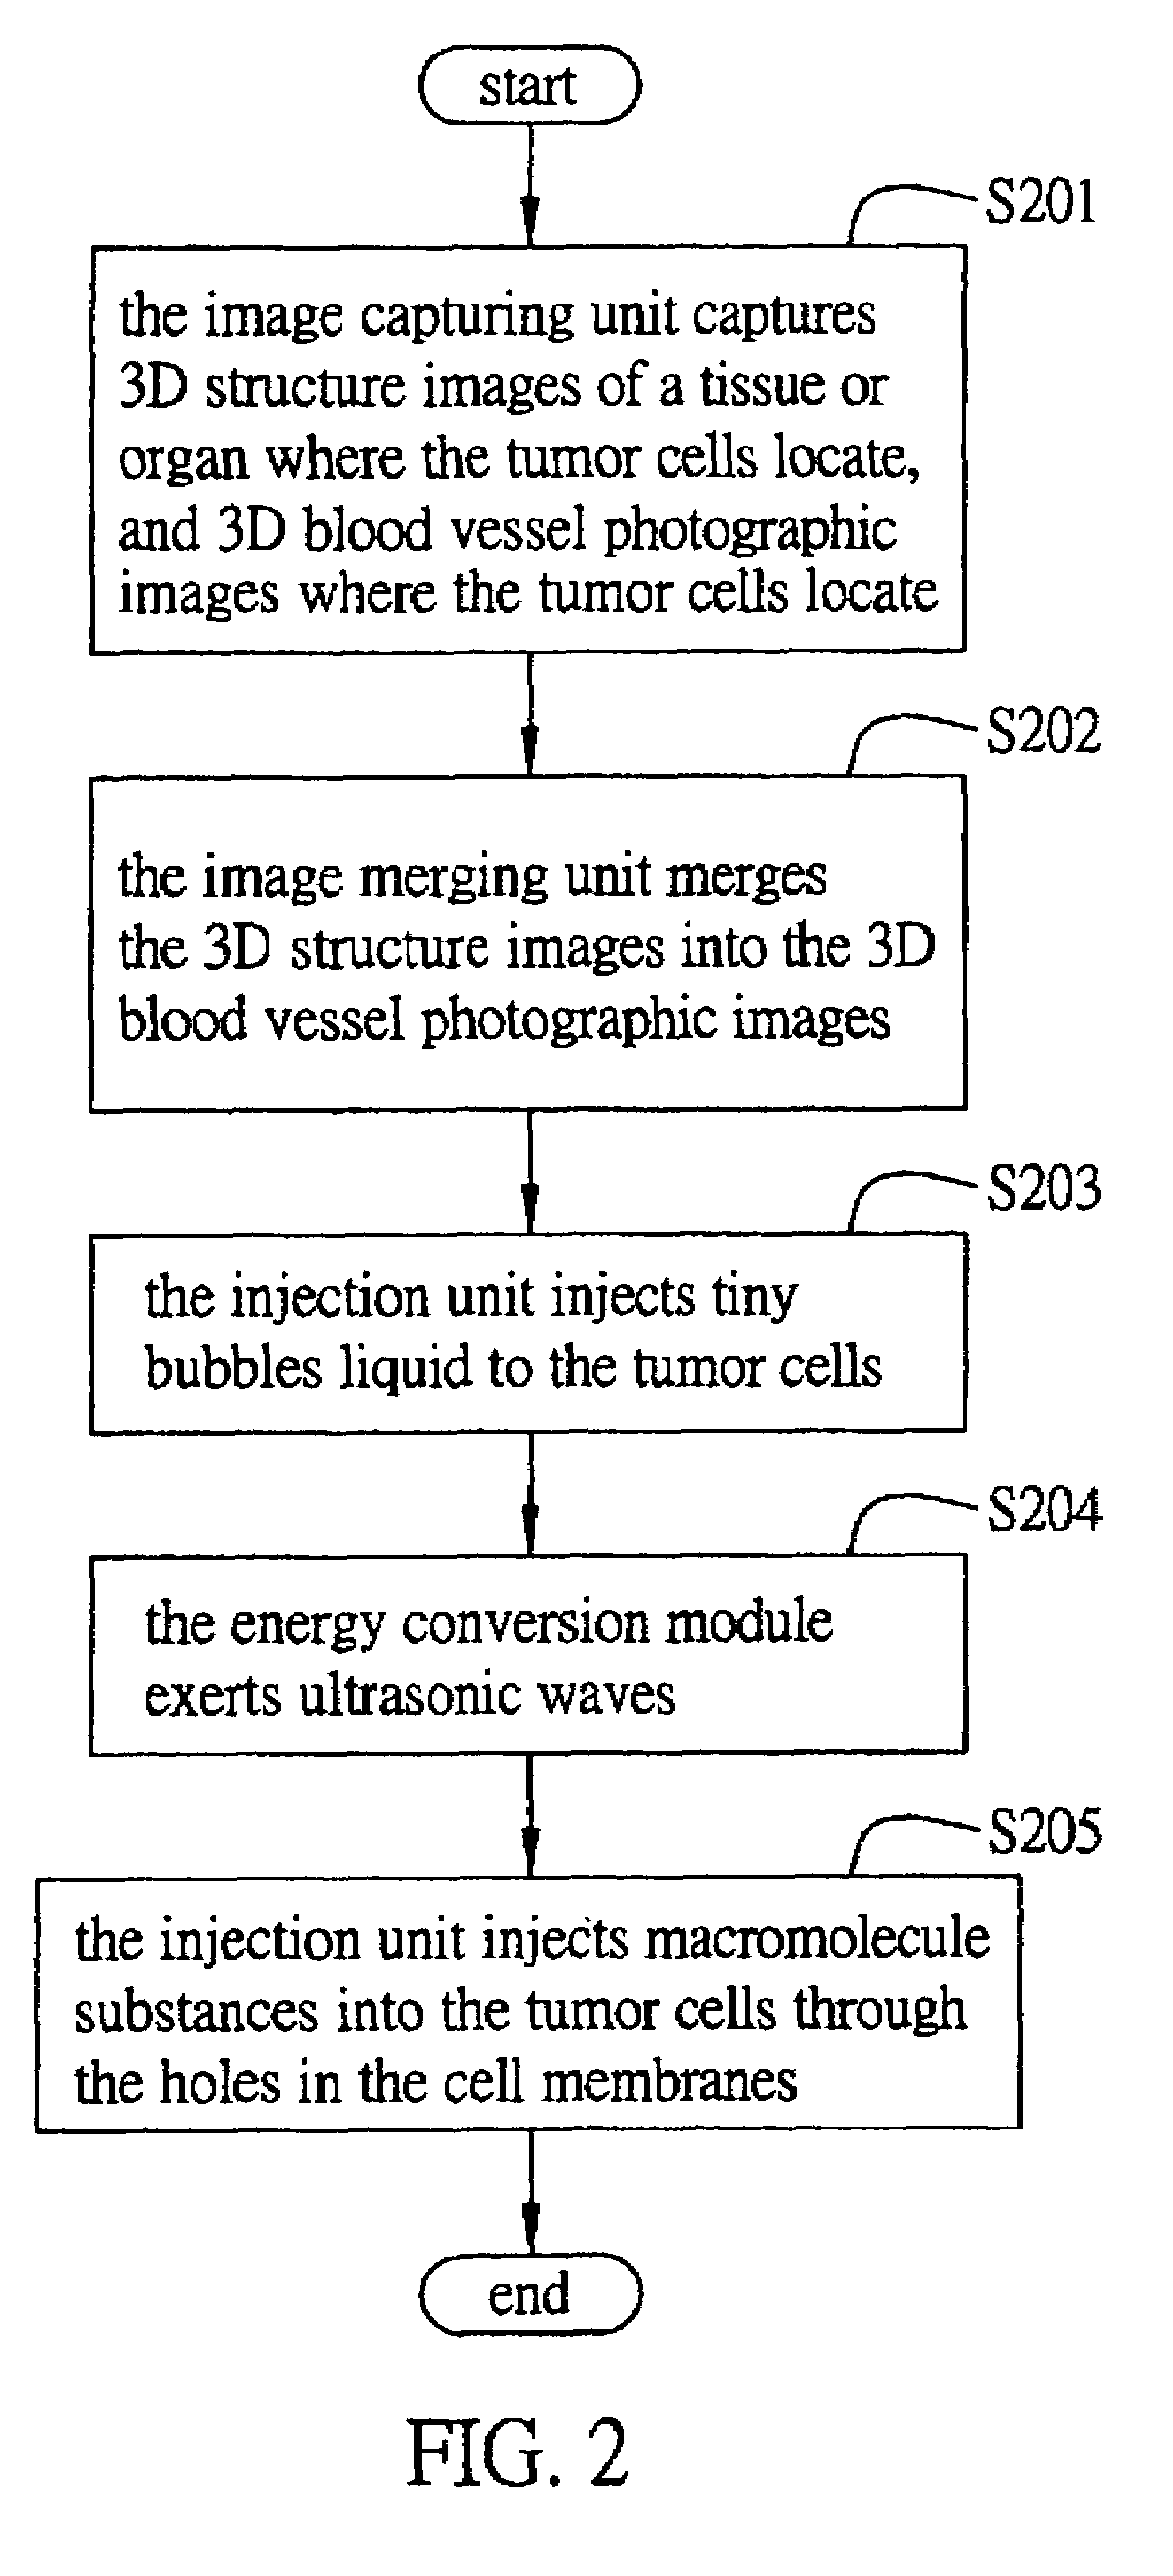 Method and system for leading macromolecule substances into living target cells